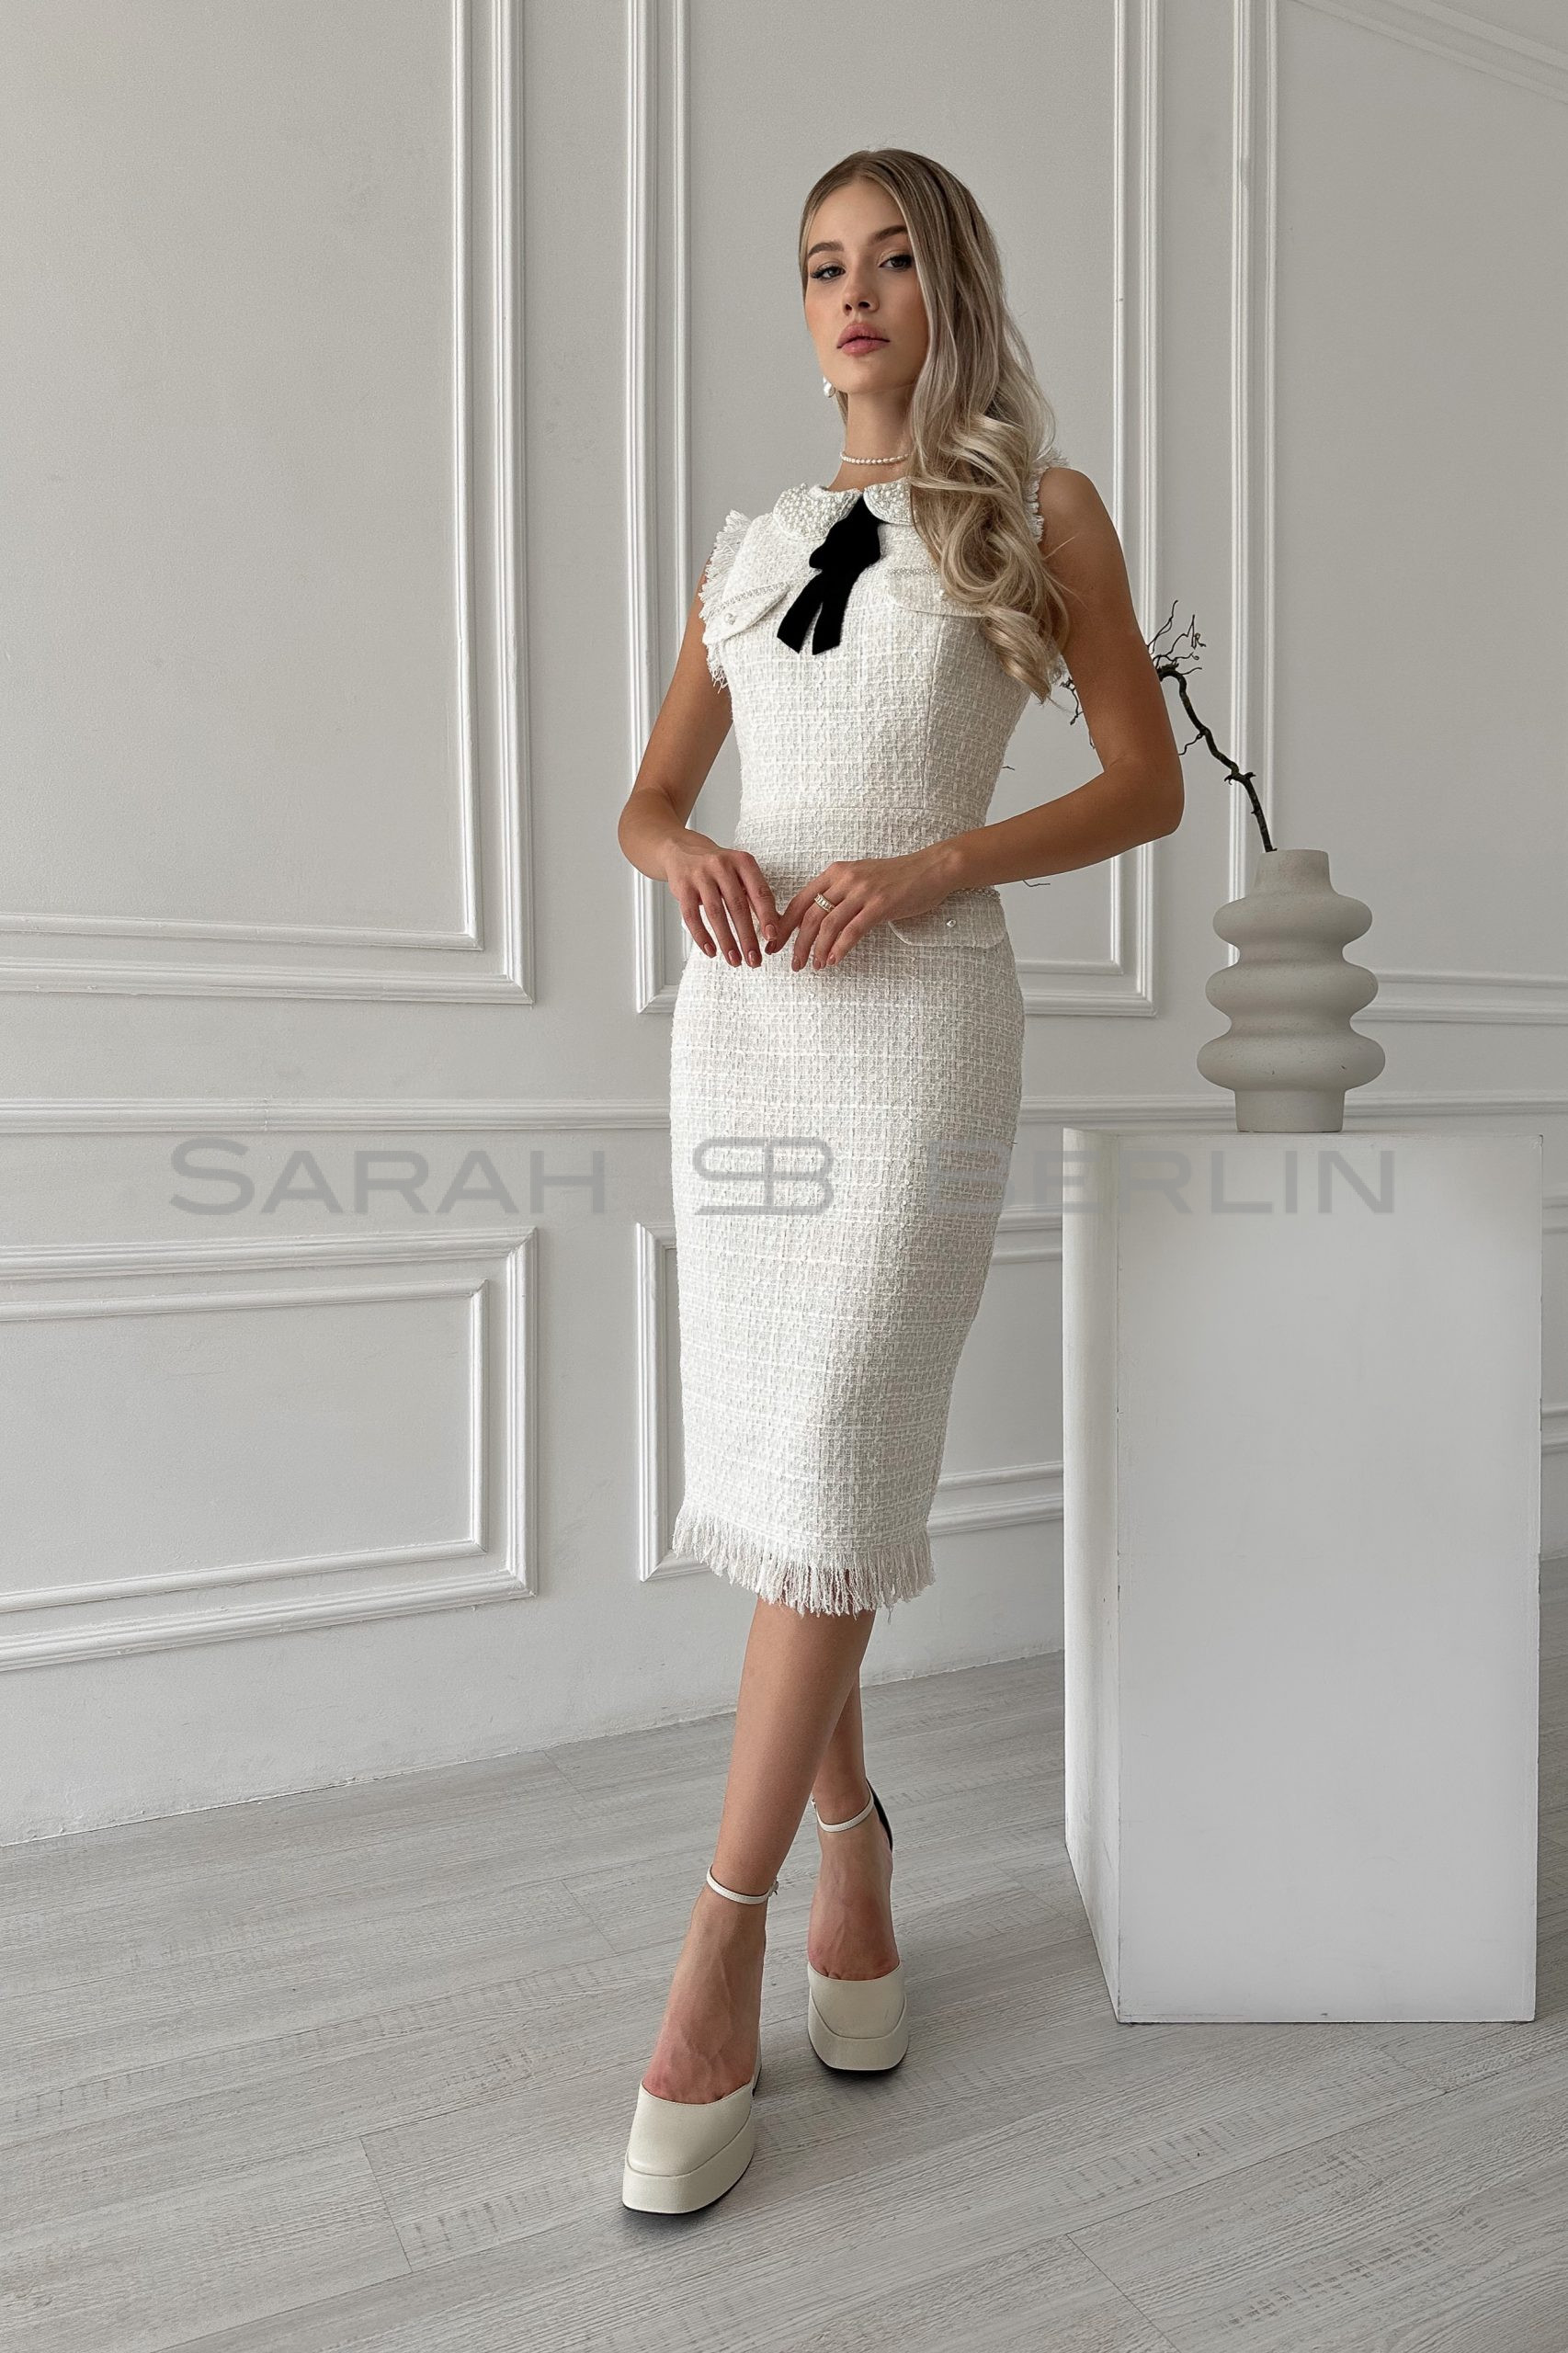 Tweed midi dress, with short sleeves, with white lace - Sarah Berlin